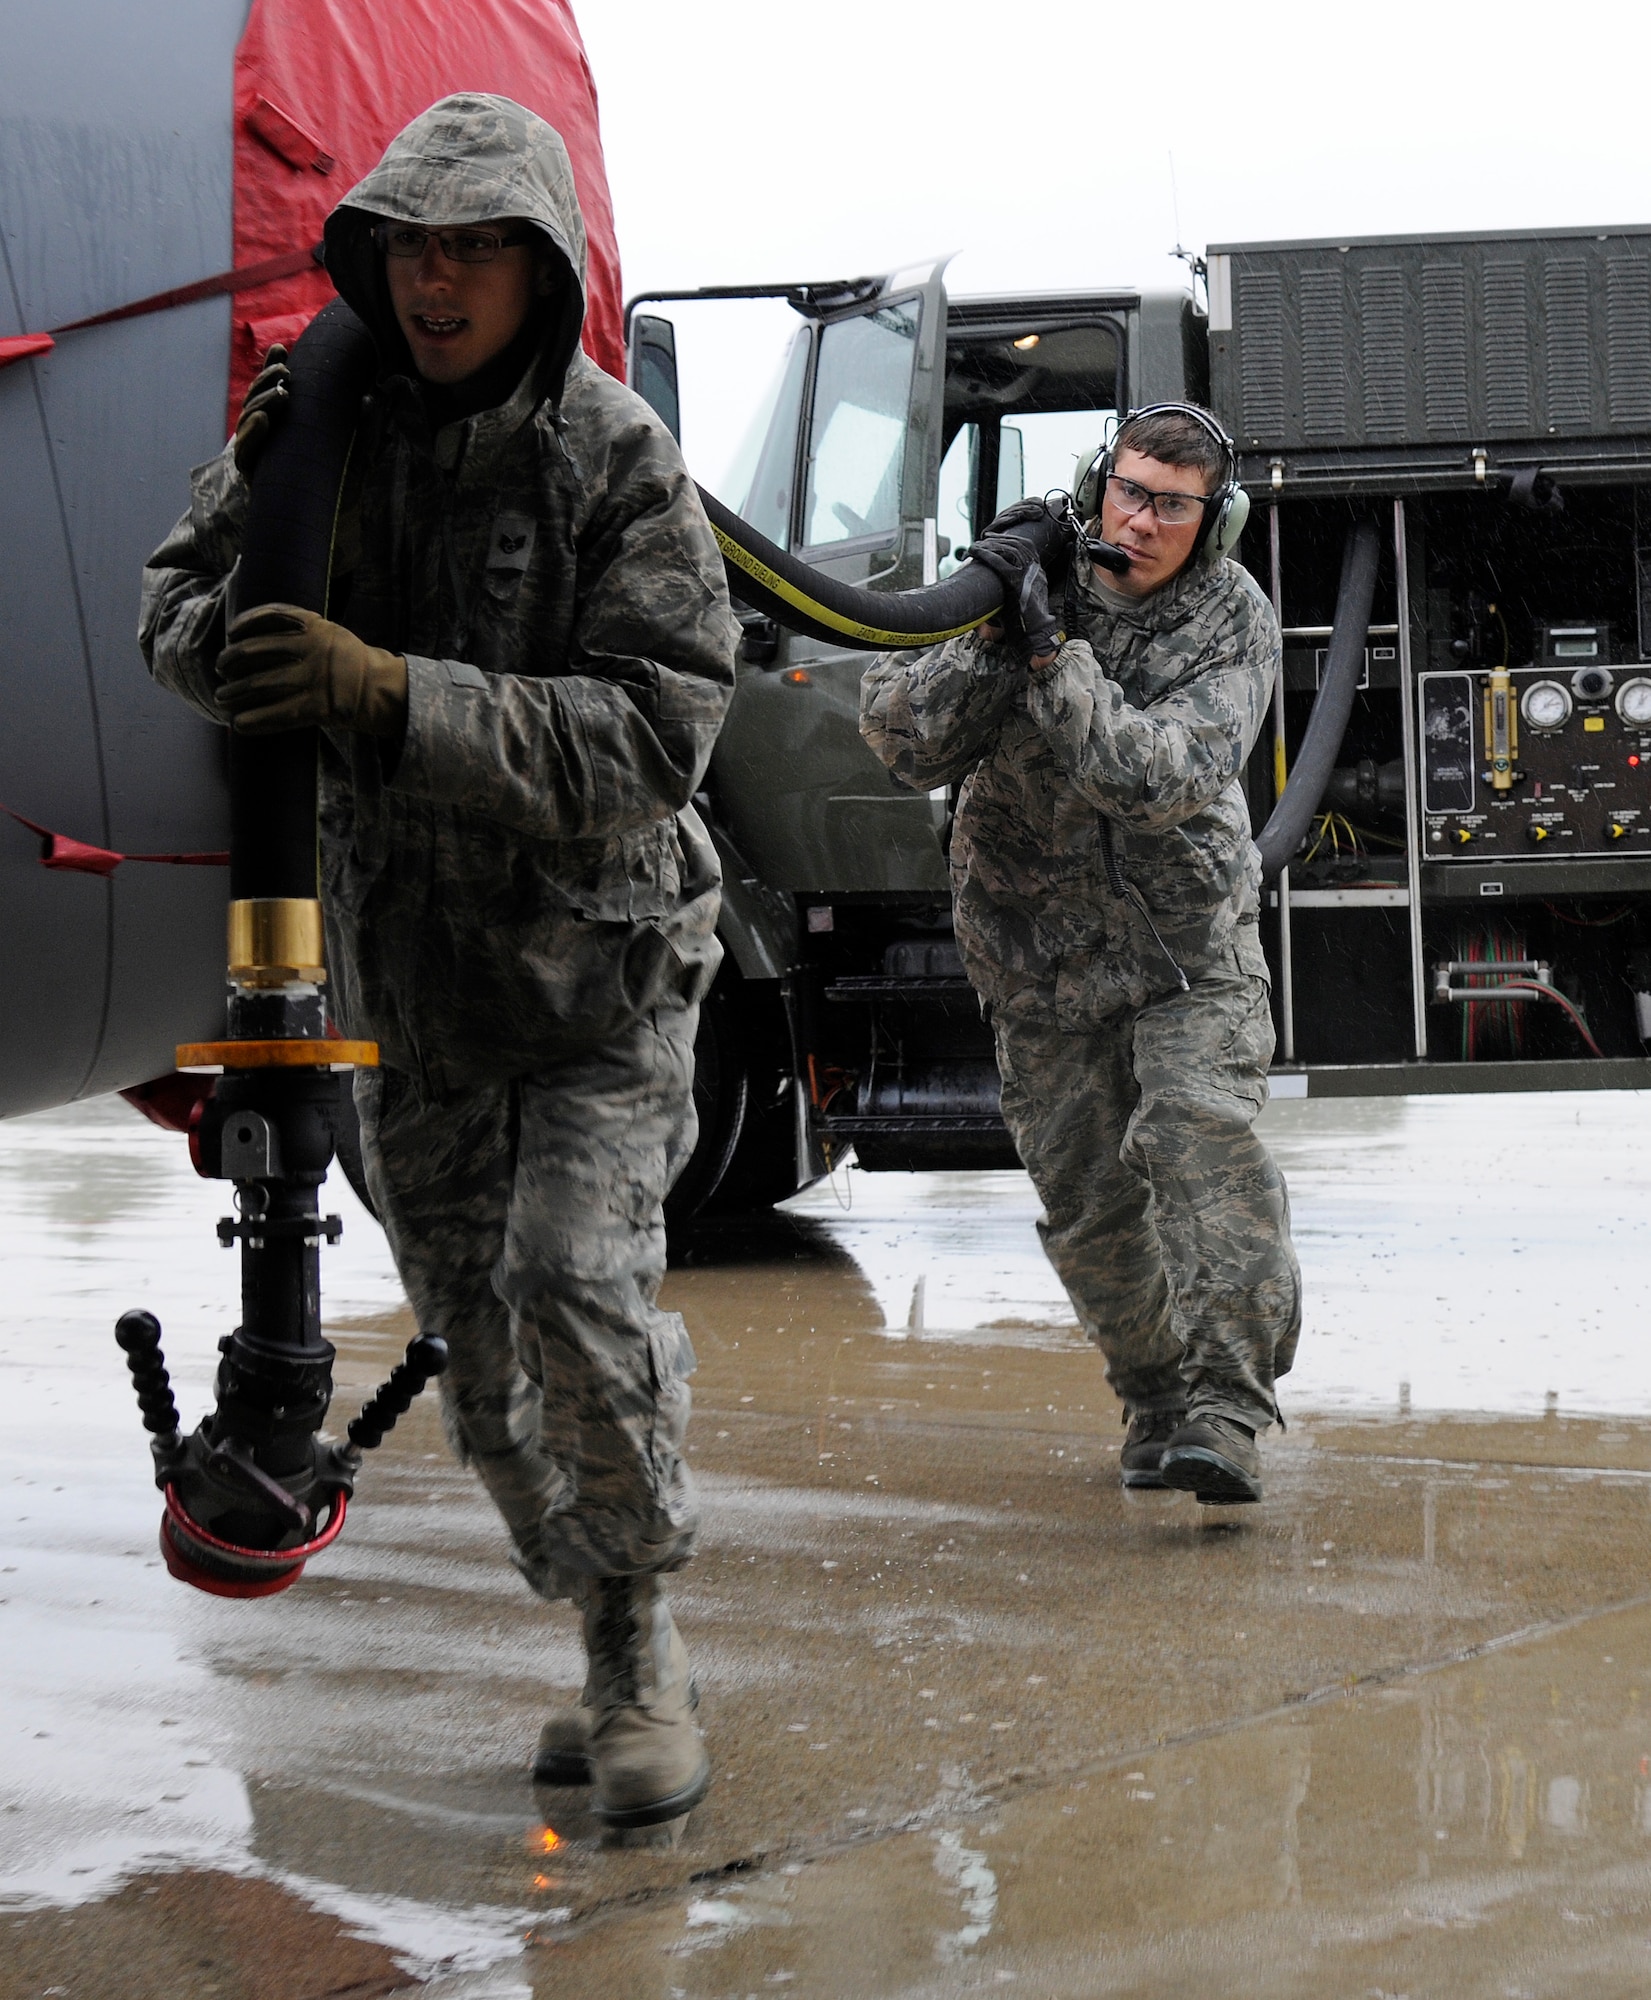 Staff Sgt. Daniel Vergun, 127th Logistics Readiness Squadron fuels technician, and Staff Sgt. Jesse Torma, 191 Maintenance Squadron crew chief, carry the fuel hose to a KC-135 Stratotanker on the flightline at Selfridge Air National Guard Base, Mich., July 9, 2015. Fully loaded, a KC-135 can hold up to 203,000 pounds of fuel. On a typical day, the average load is around 40,000 pounds or 5,900 gallons of fuel. (U.S. Air National Guard Photo by Senior Airman Ryan Zeski/Released)